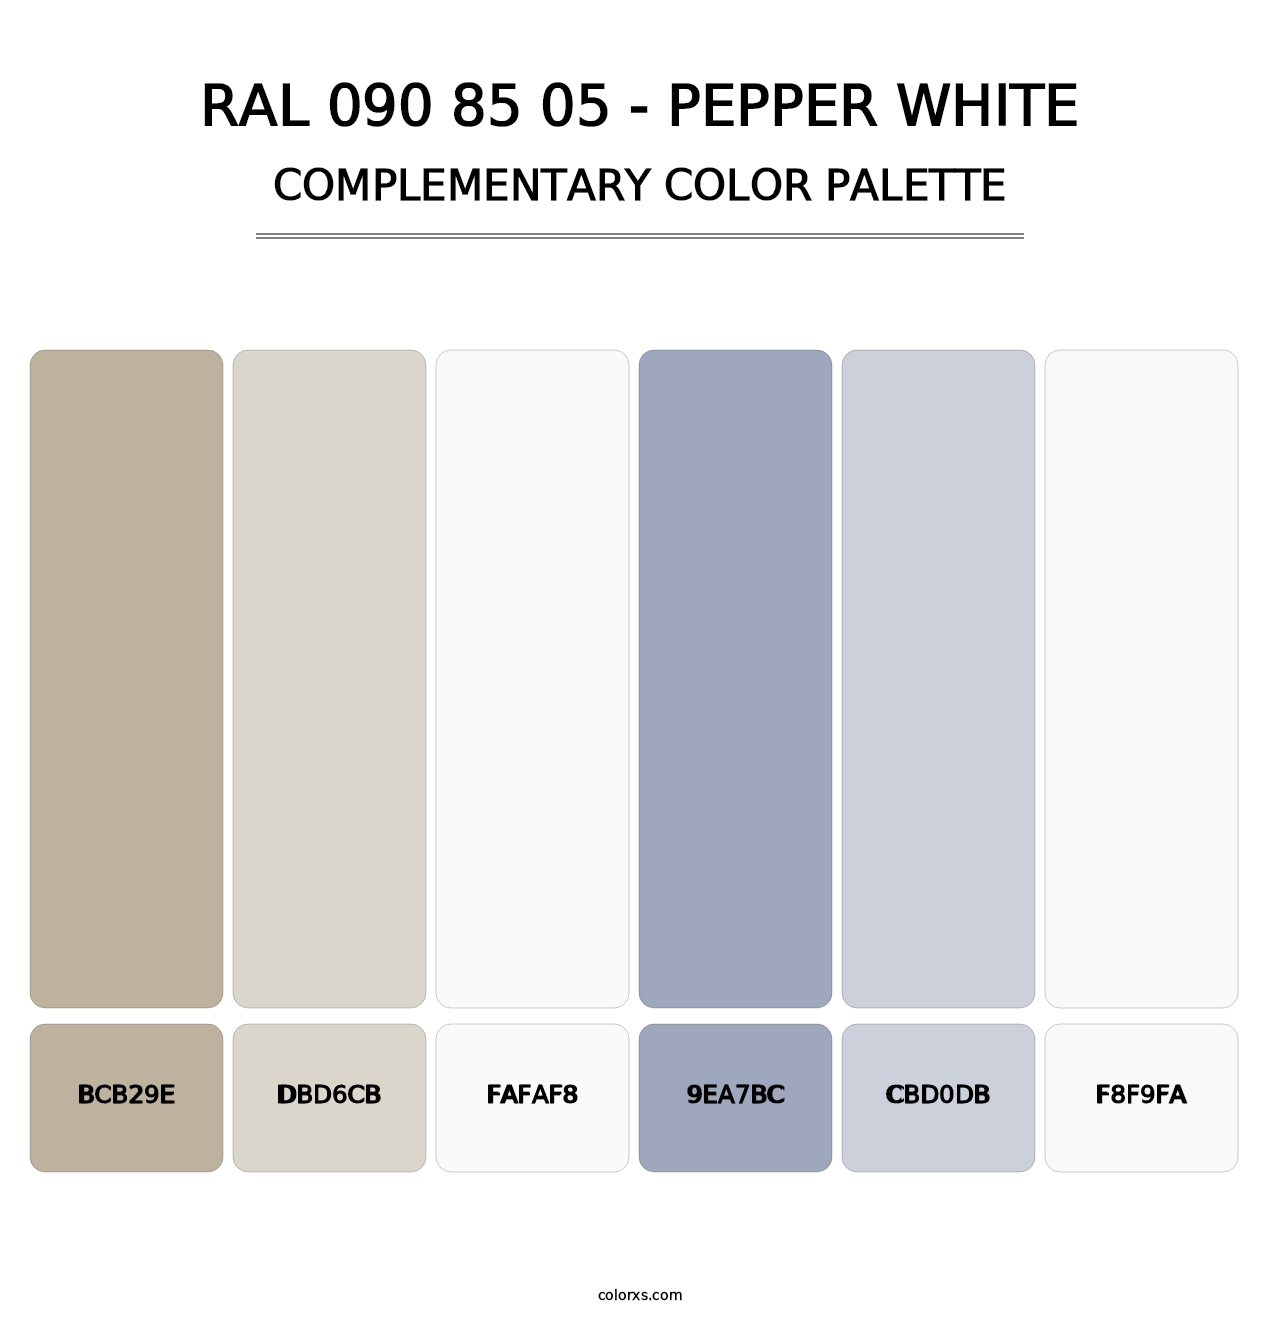 RAL 090 85 05 - Pepper White - Complementary Color Palette